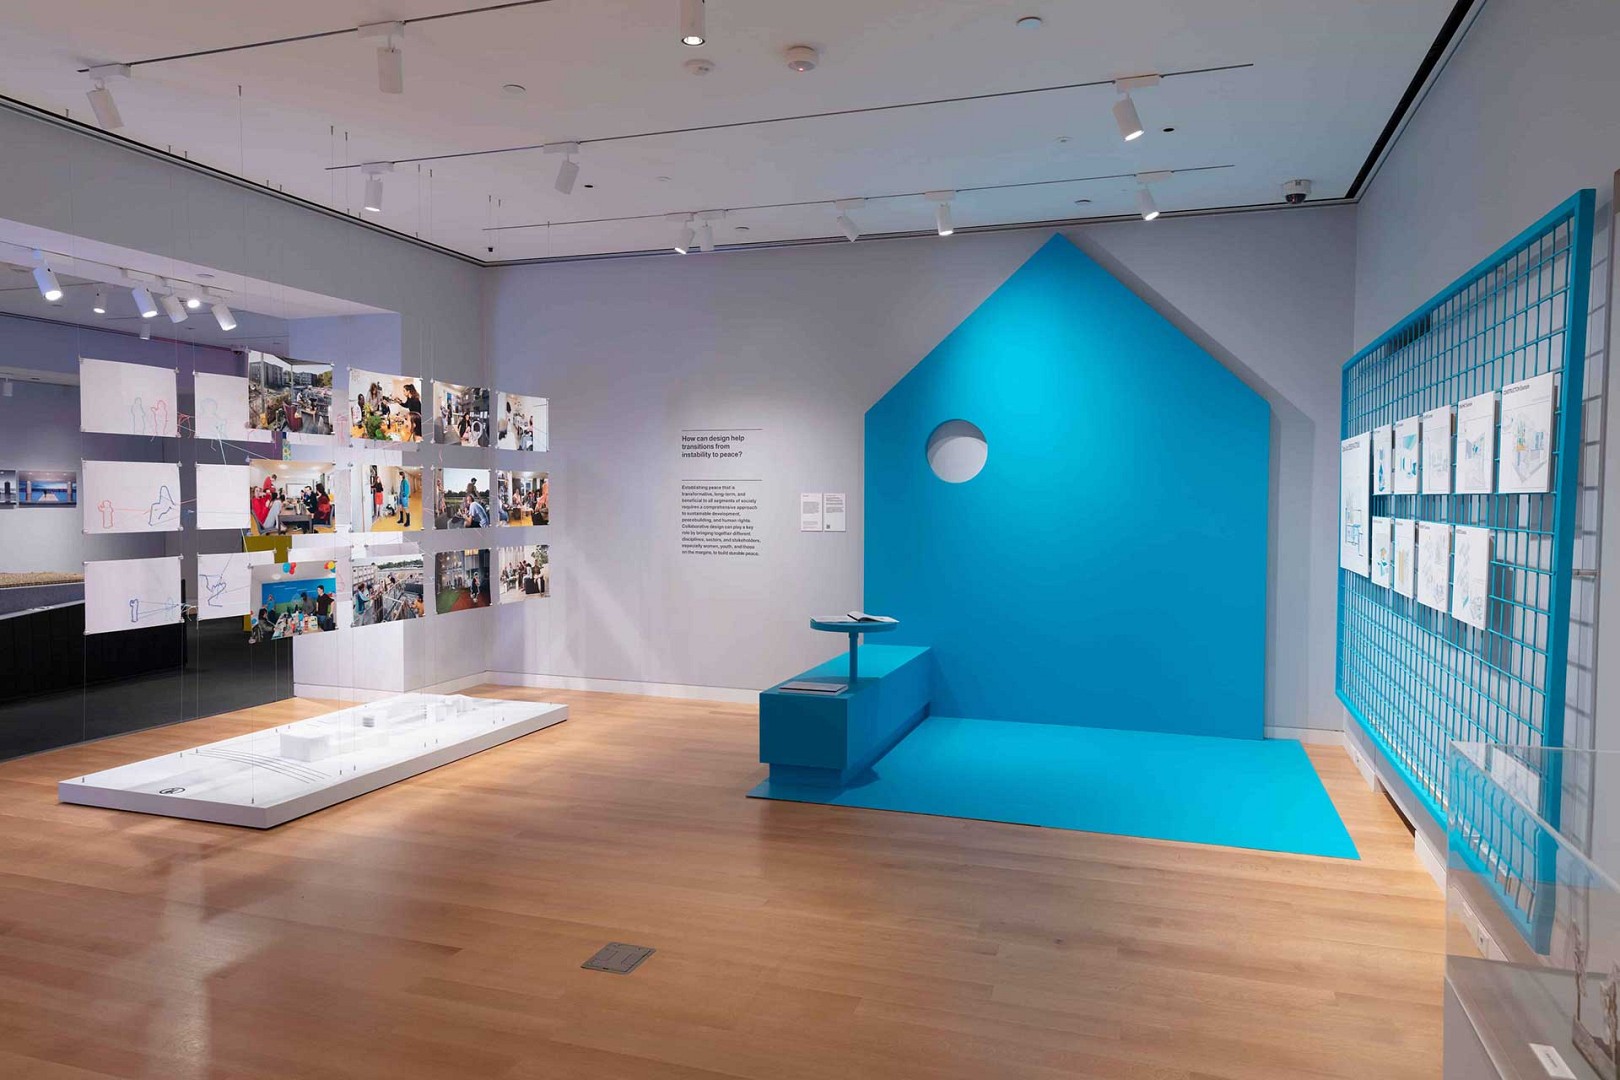 Cooper Hewitt's &lsquo;Designing Peace&rsquo; offers a glimpse of the potential of design as a tool for world harmony